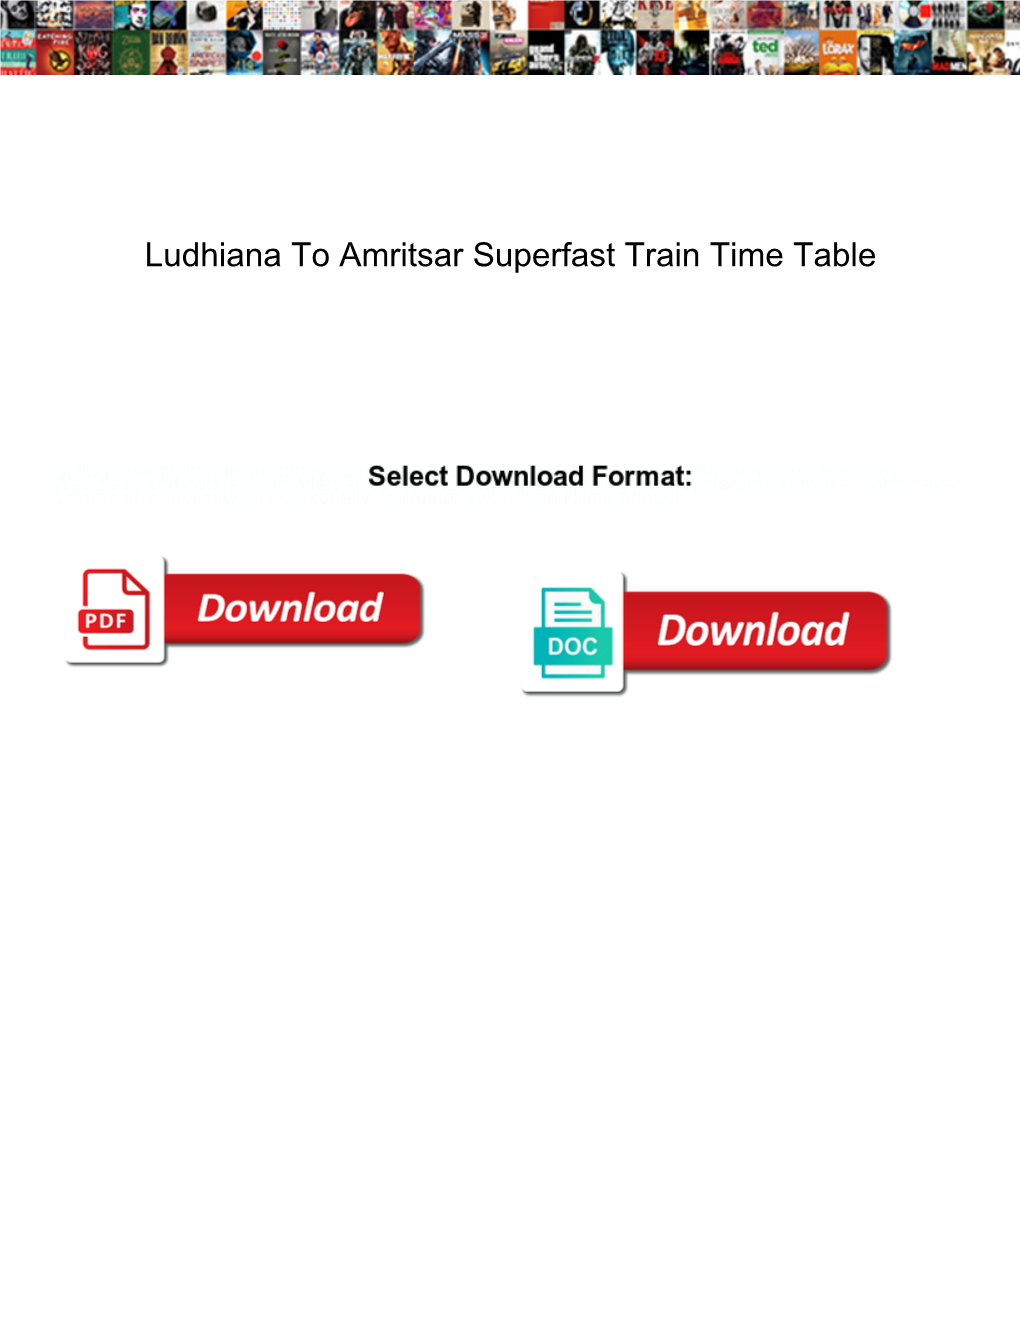 Ludhiana to Amritsar Superfast Train Time Table